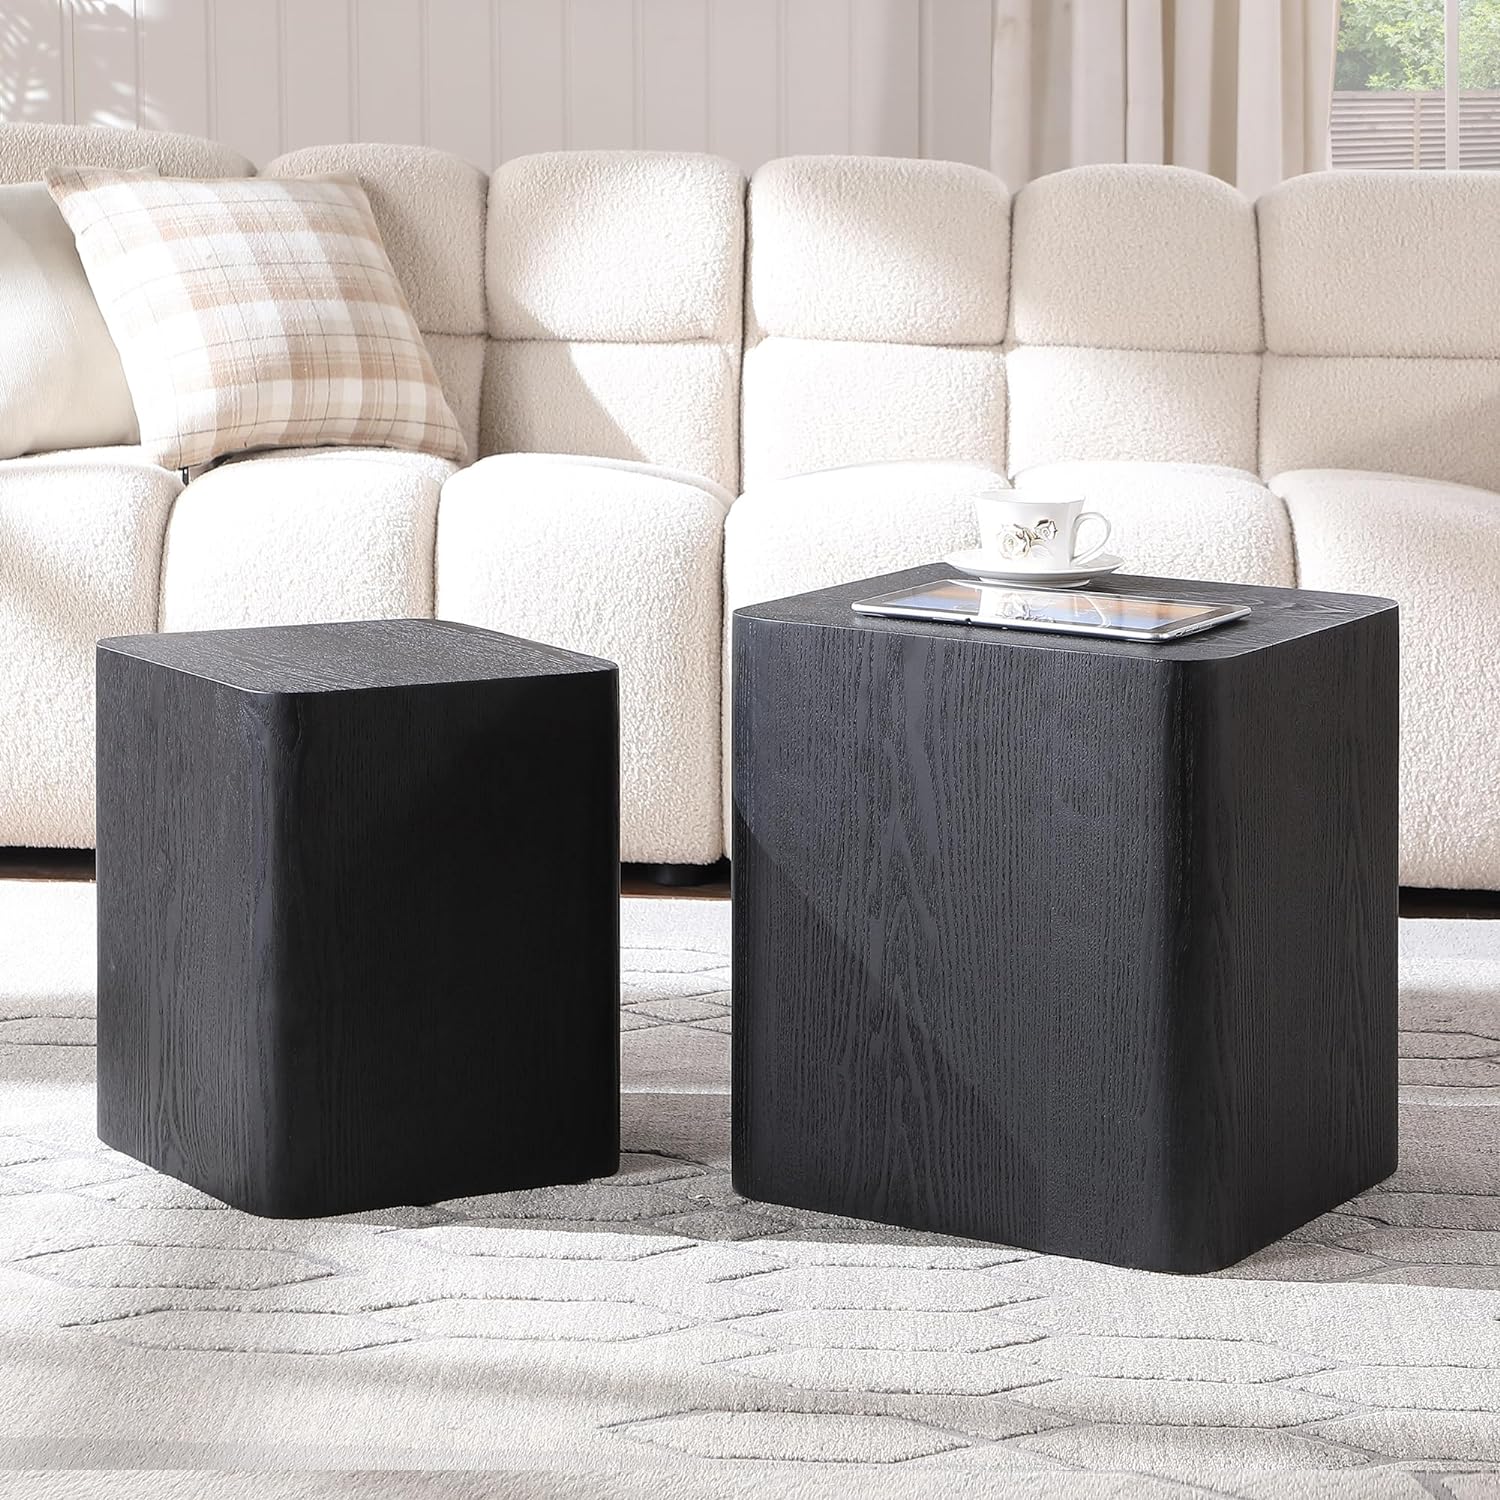 Nesting Table Set of 2